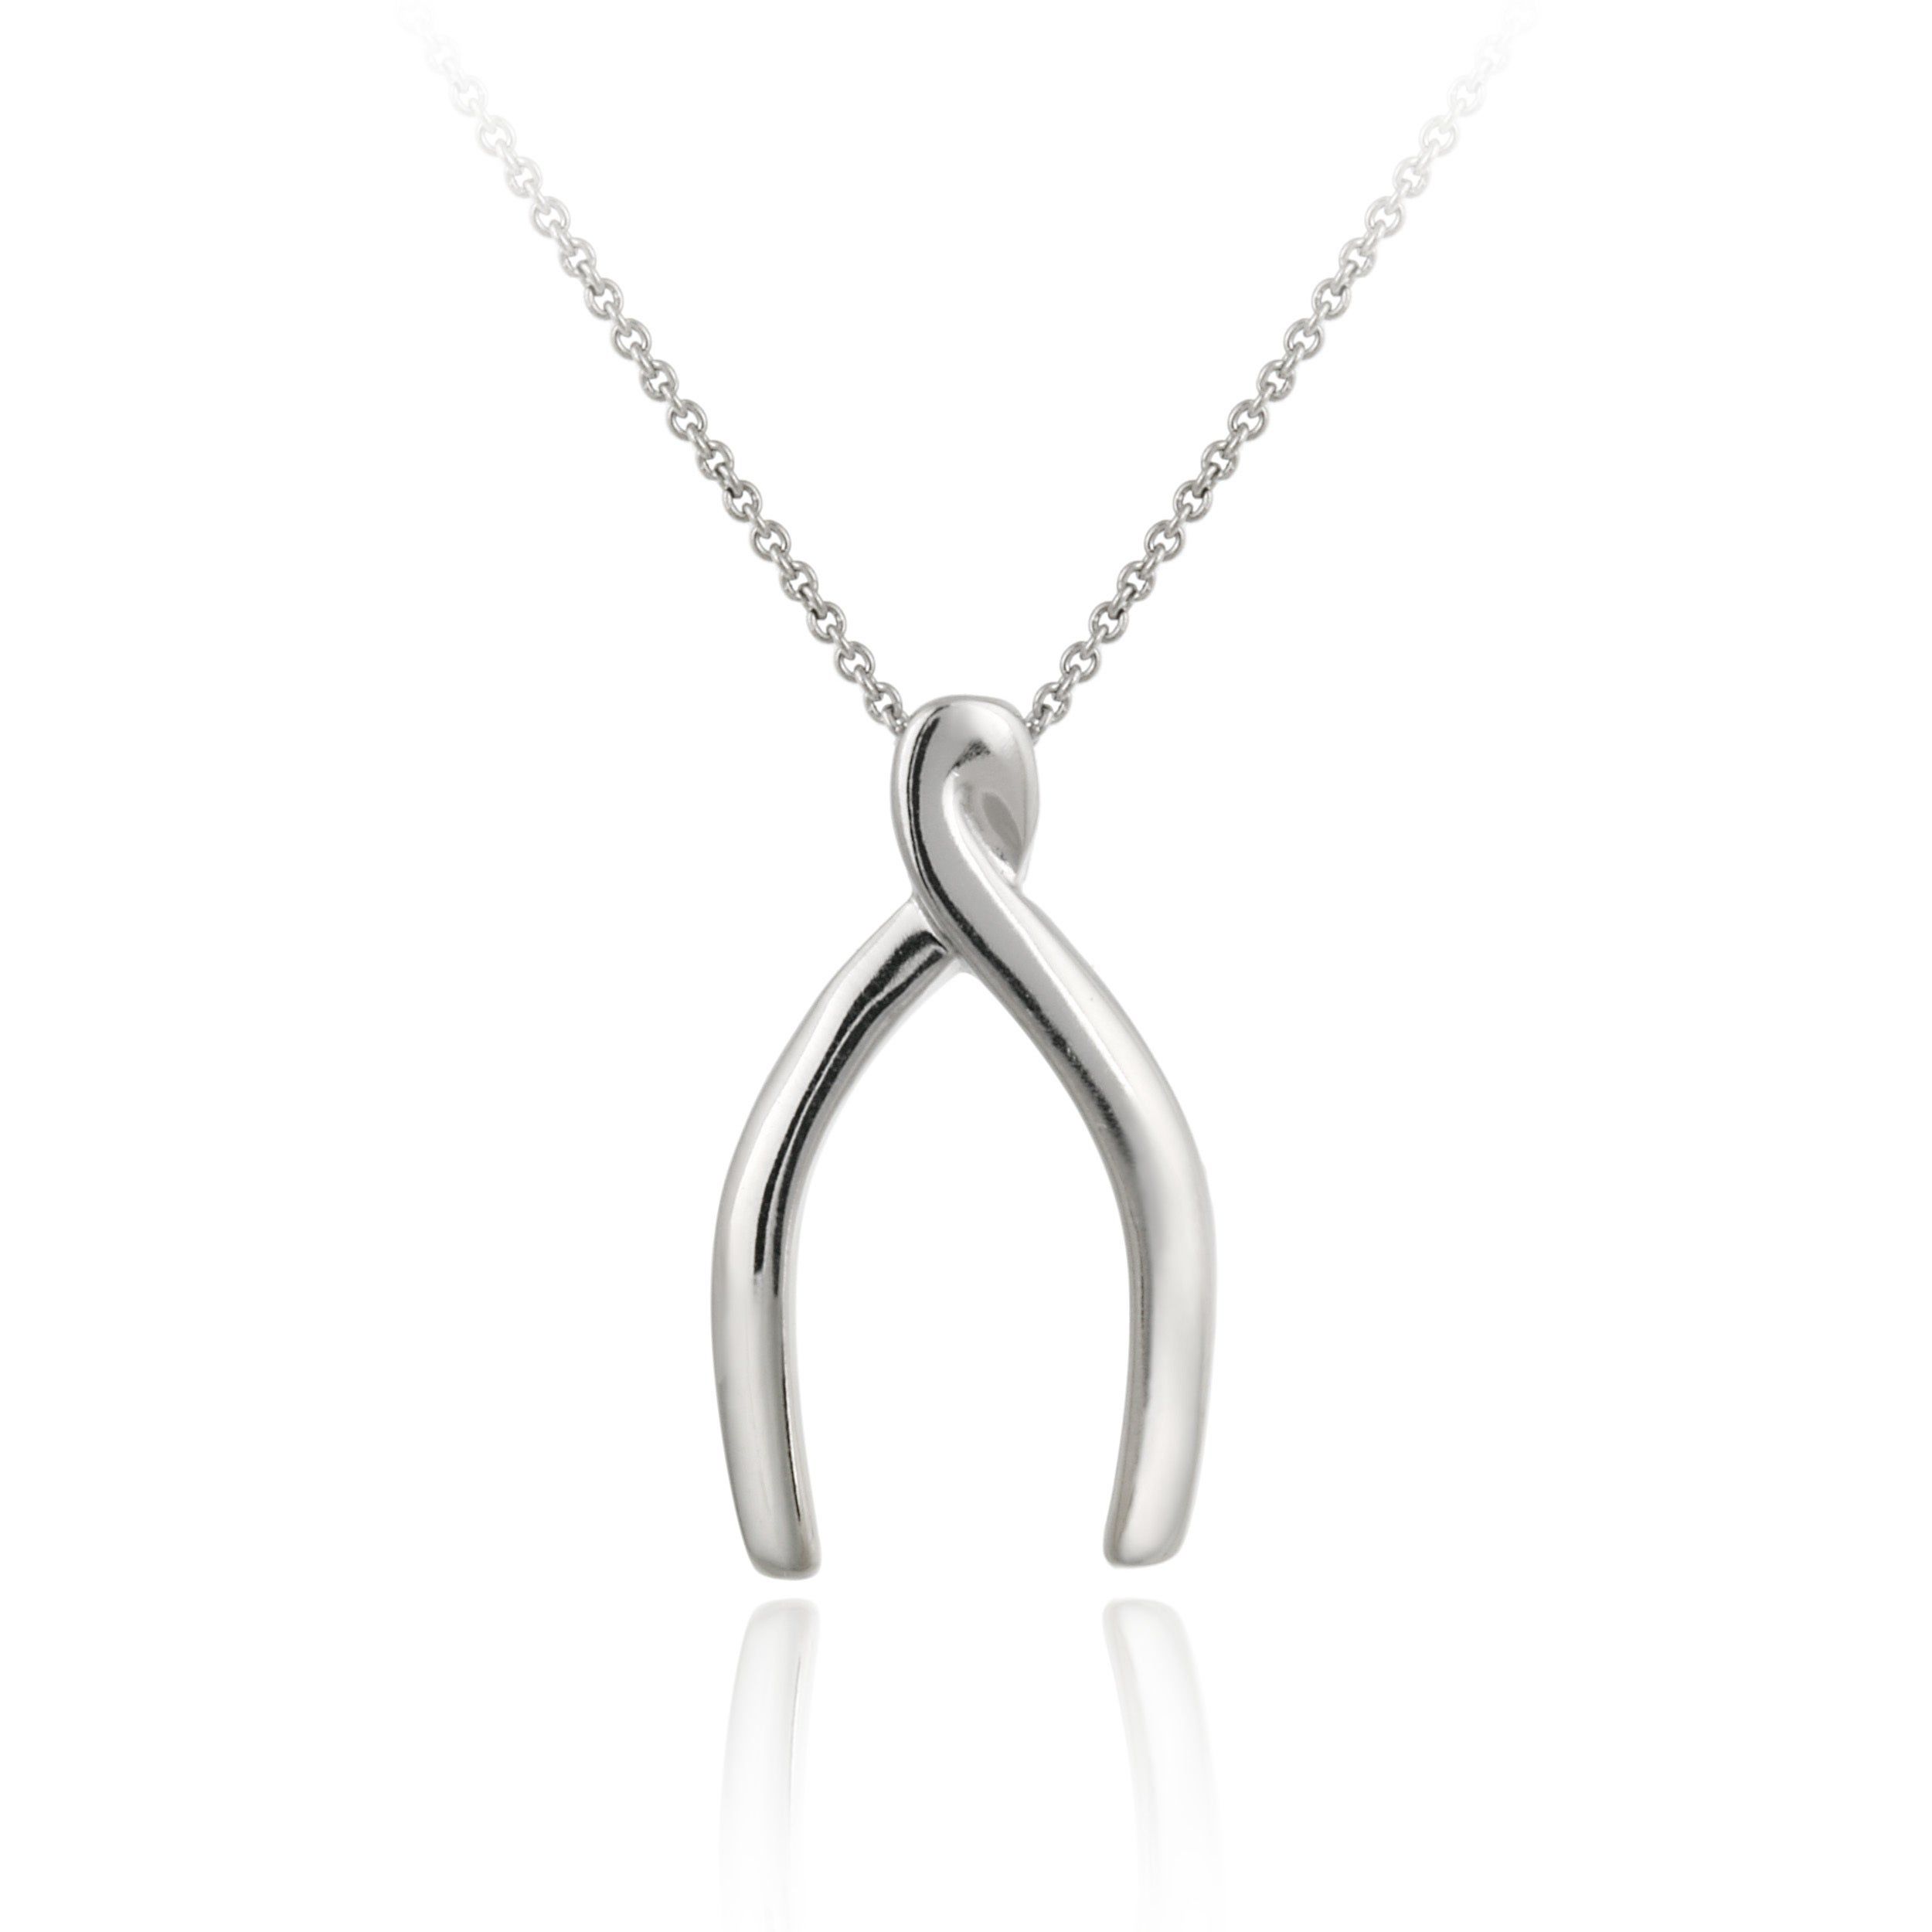 Mondevio Sterling Silver Polished Wishbone Necklace Pertaining To Most Recent Polished Wishbone Necklaces (View 8 of 25)